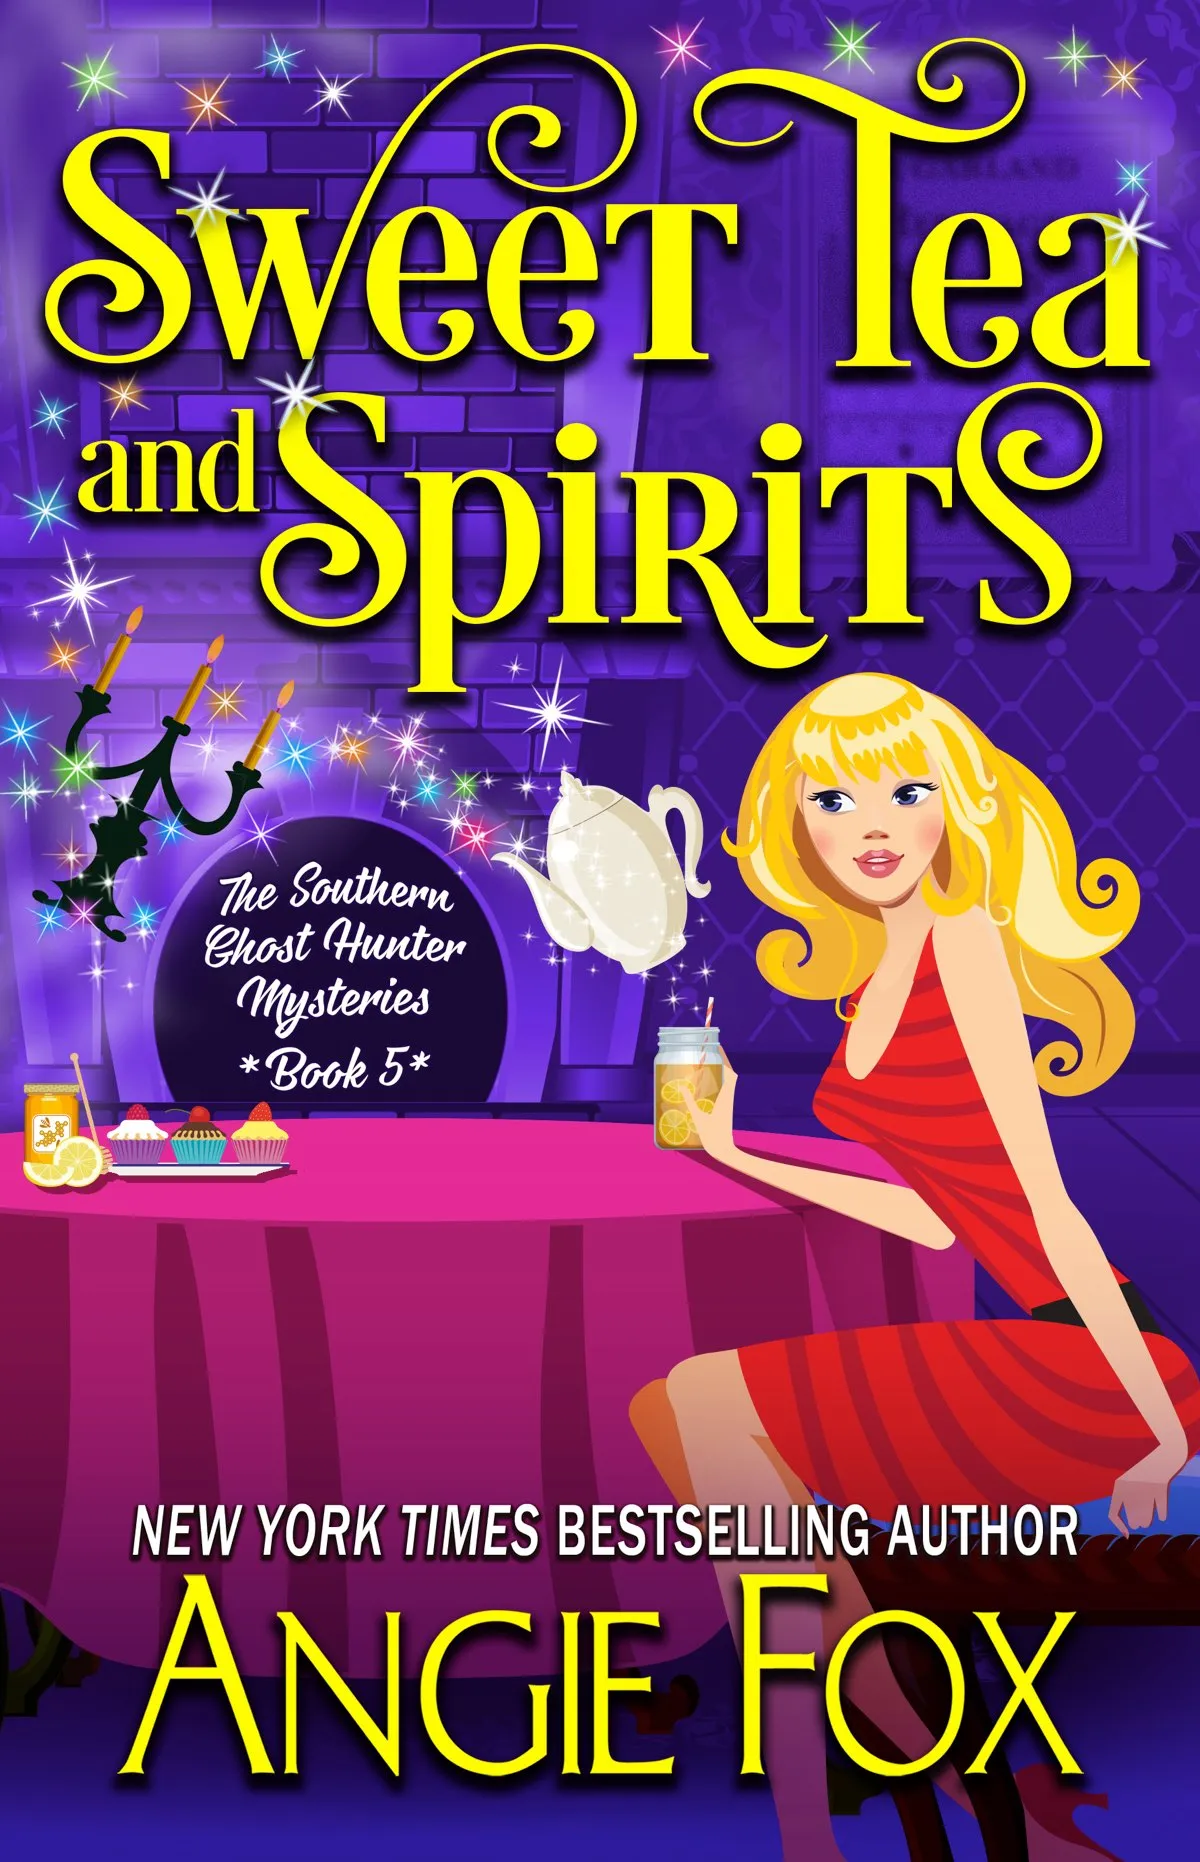 Sweet Tea and Spirits (Southern Ghost Hunter Mysteries #5)